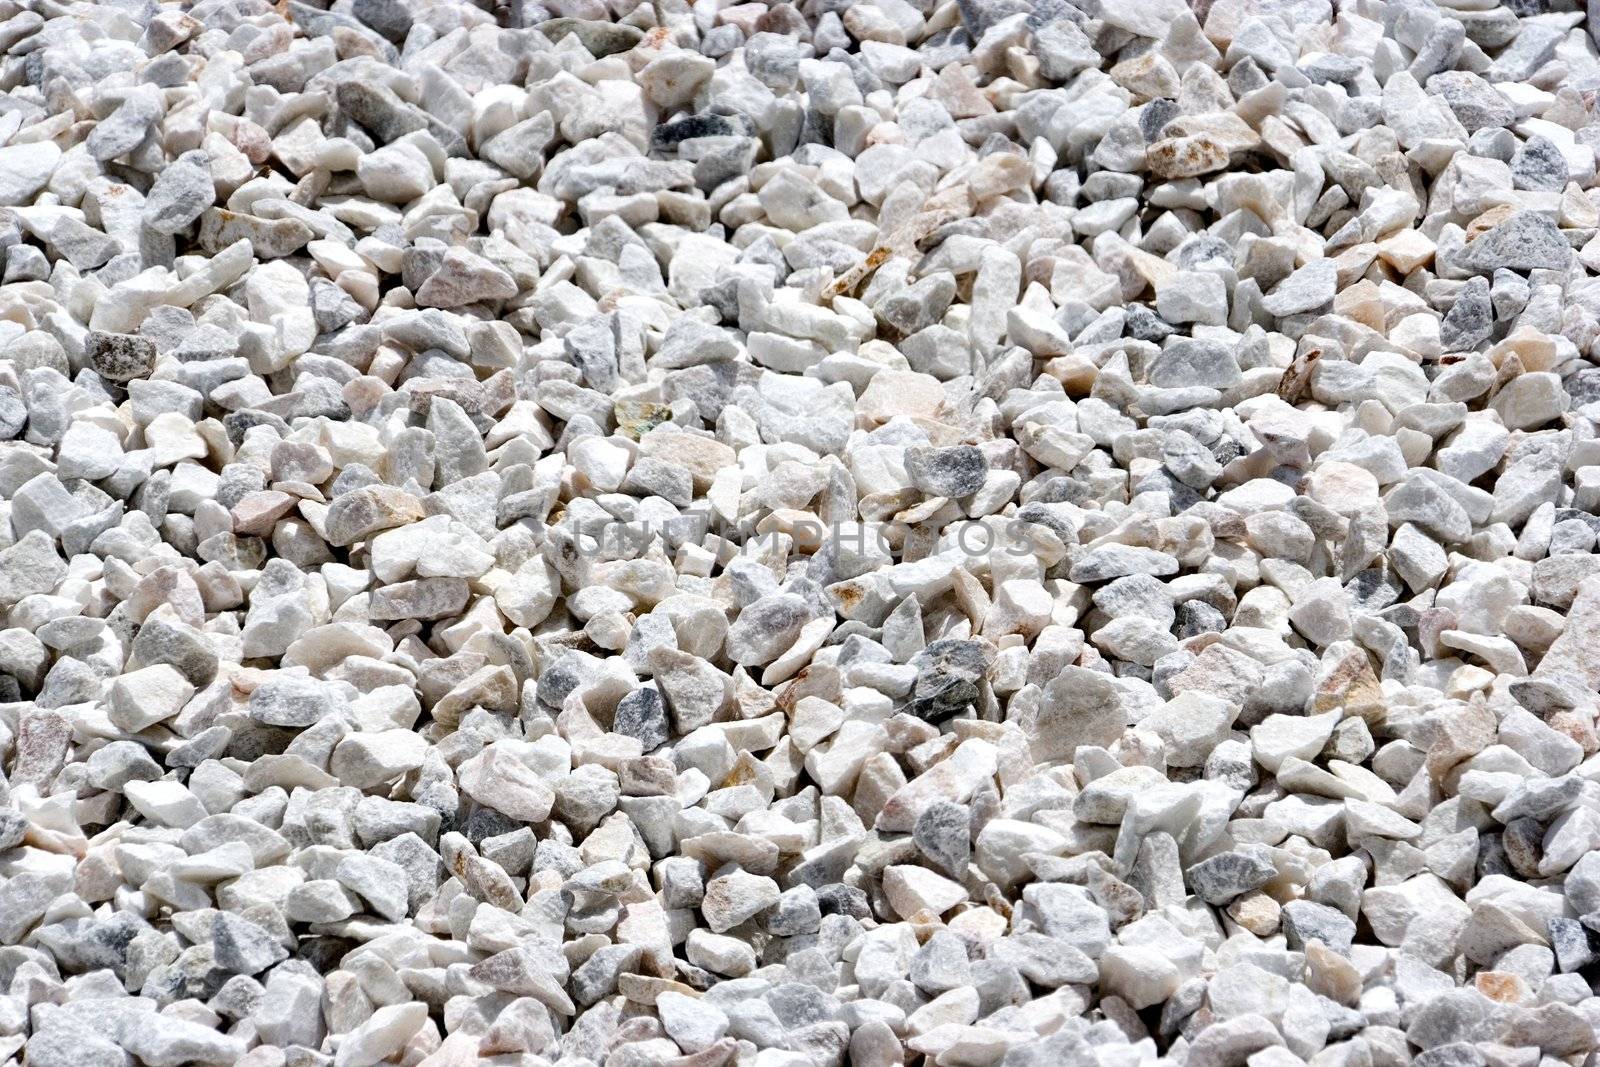 Image of a granite stone aggregate for road construction.